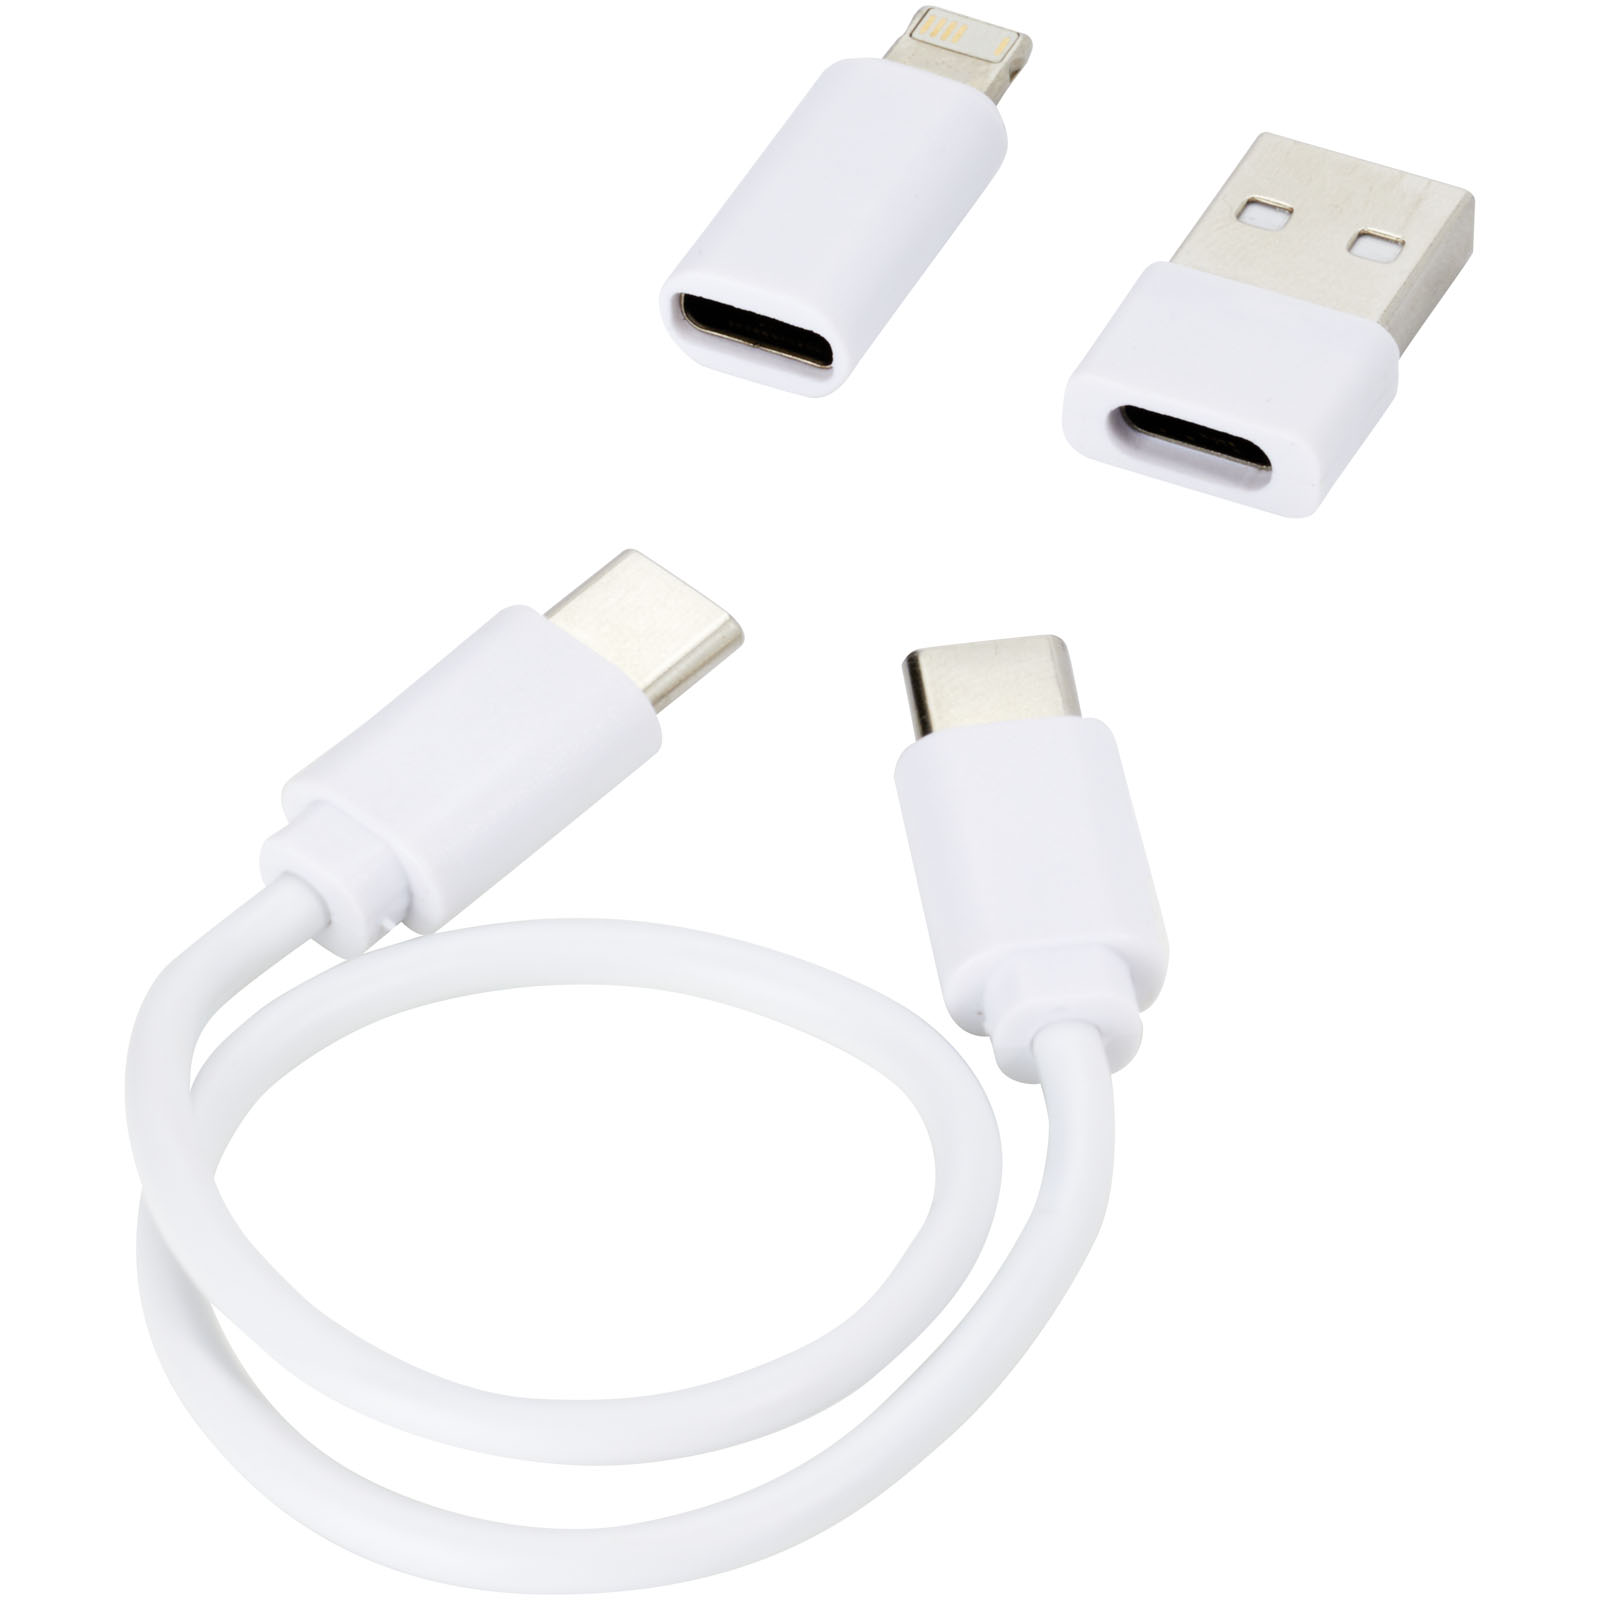 Advertising Cables - Whiz recycled plastic modular charging cable  - 5